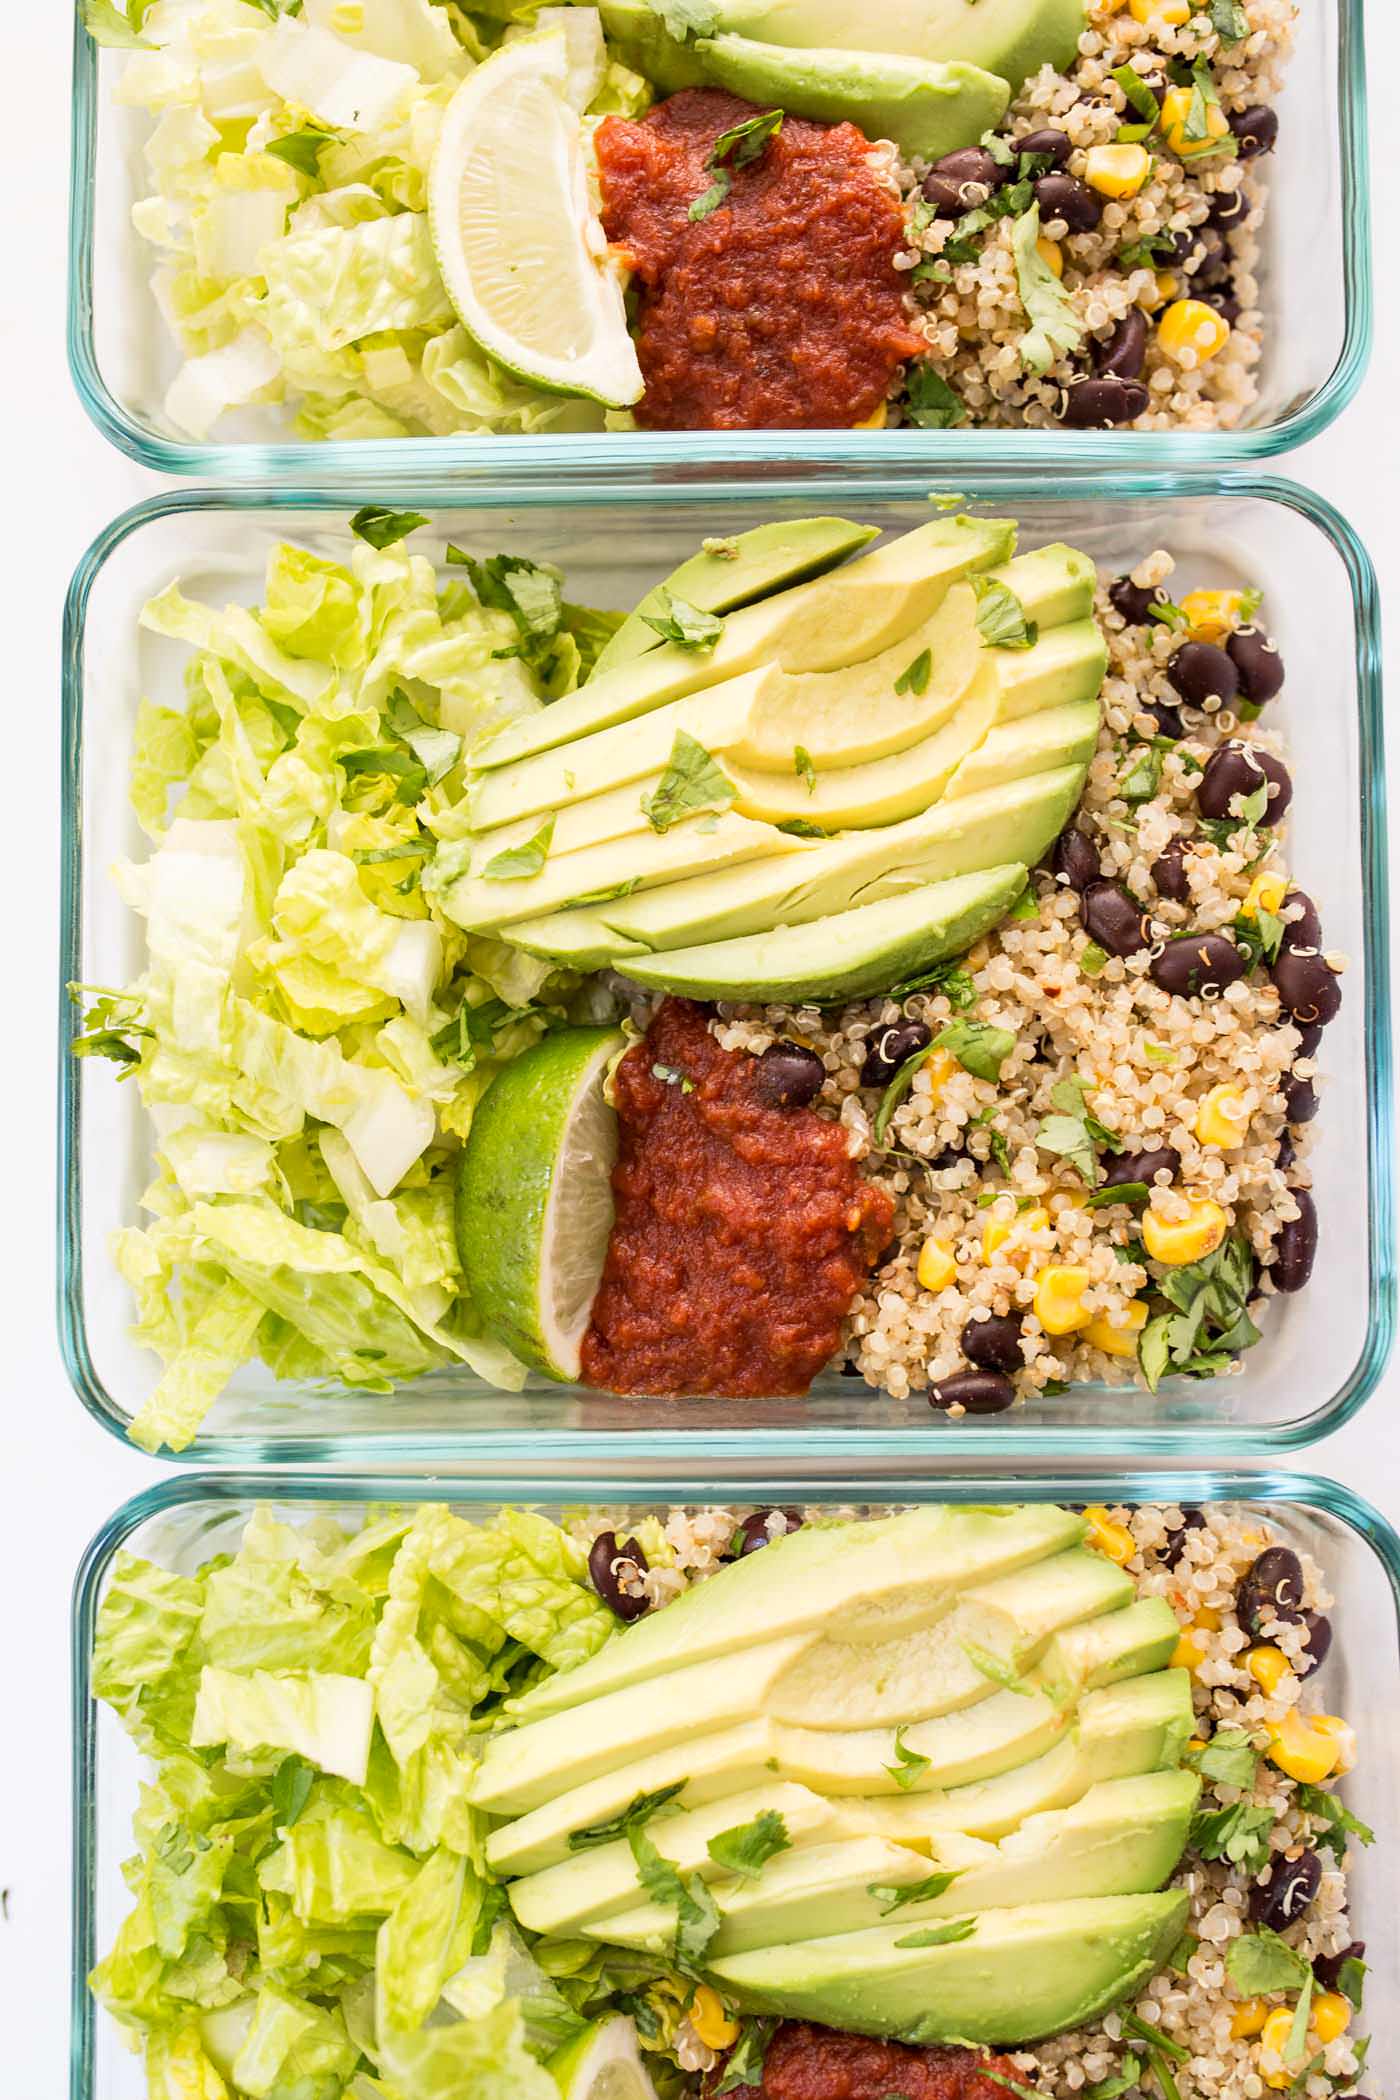 15 Vegetarian Meal Prep Recipes and Ideas